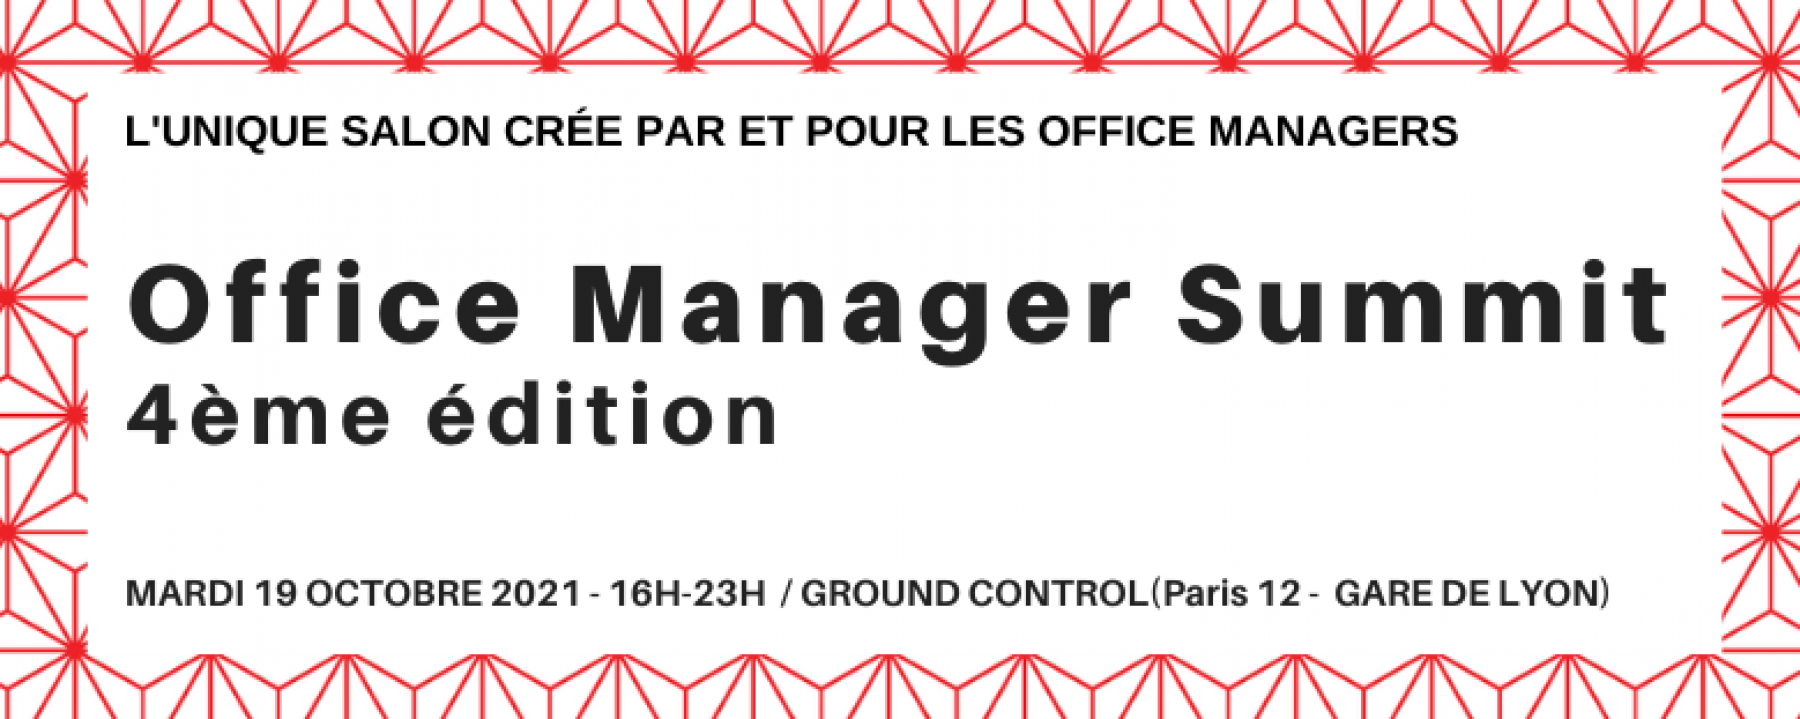 Office Managers Summit le 19 octobre 2021